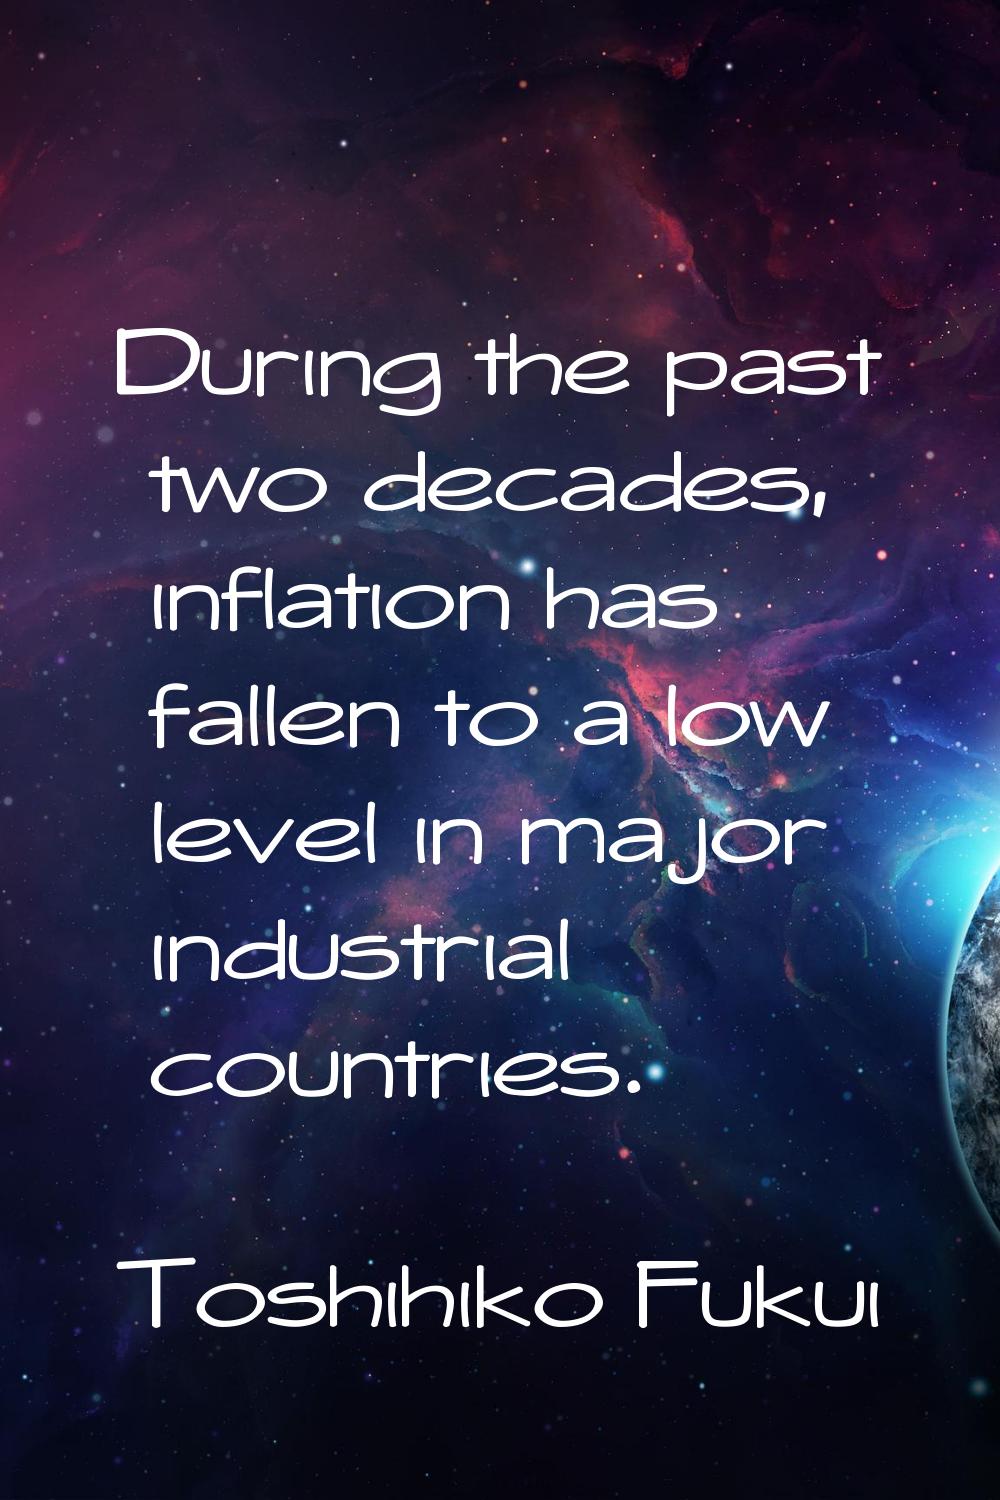 During the past two decades, inflation has fallen to a low level in major industrial countries.